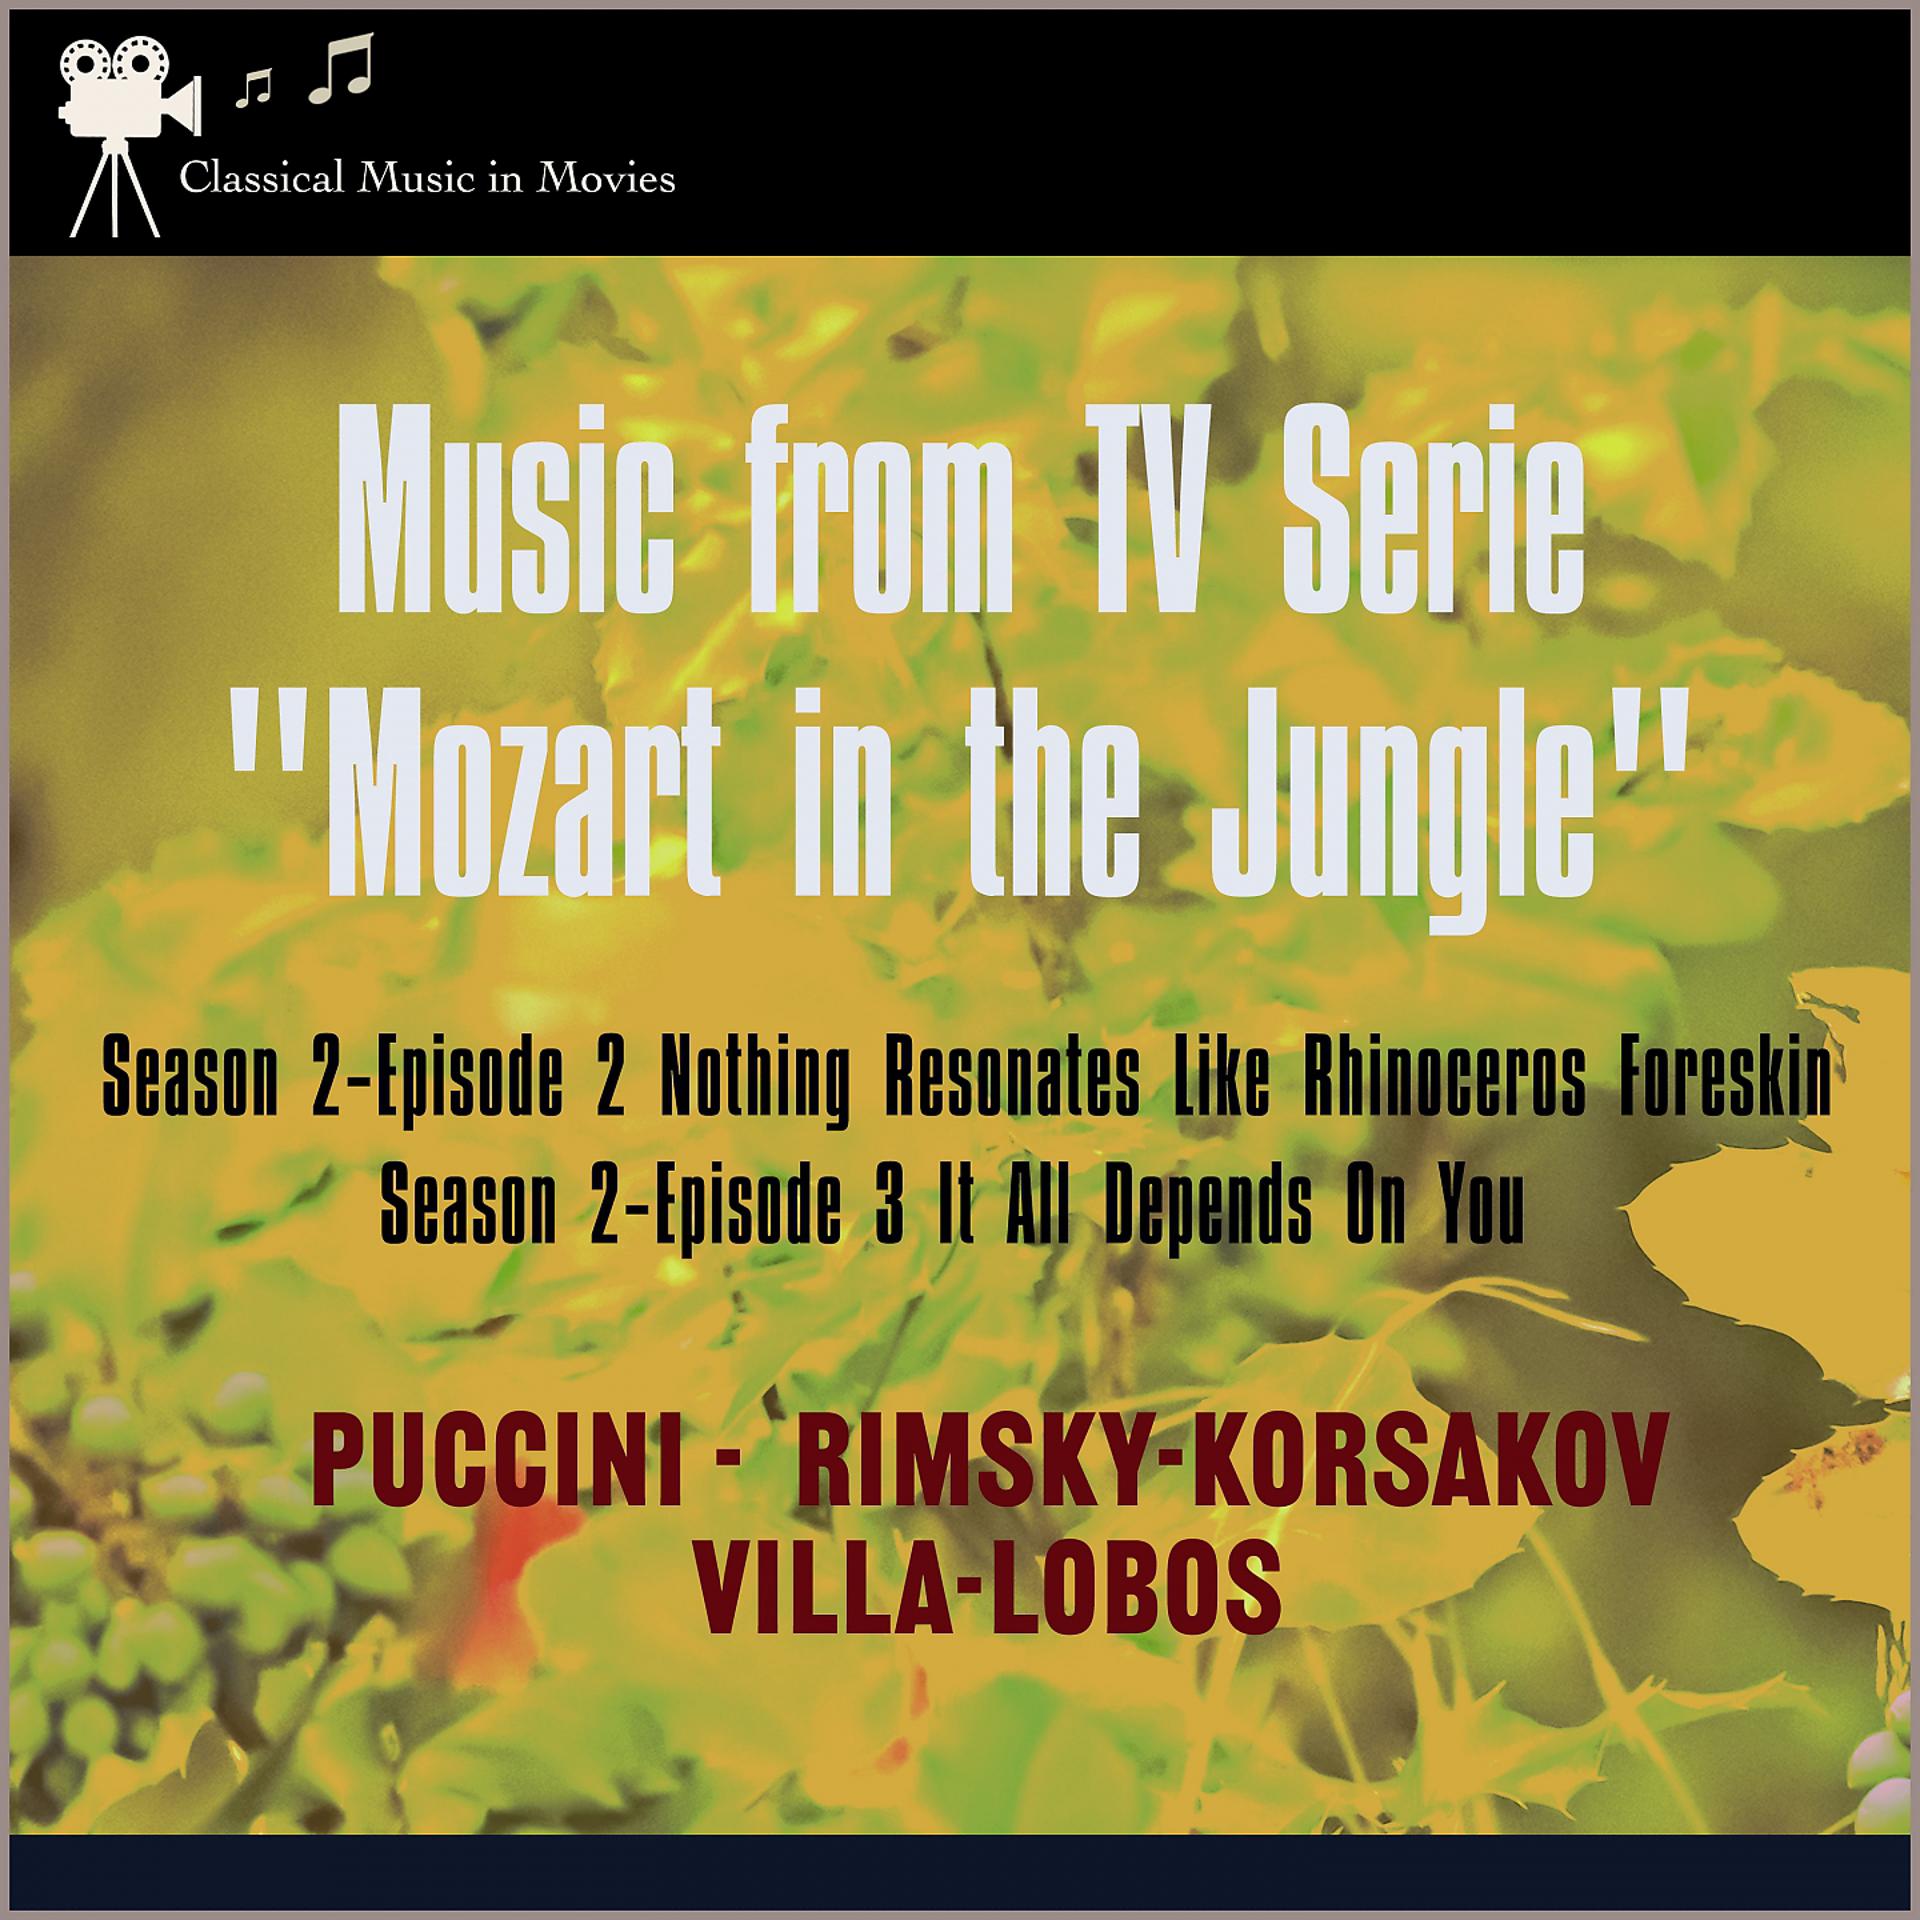 Постер альбома Music from Tv Serie: "Mozart in the Jungel" S2, E2 Nothing Resonates Like Rhinoceros Foreskin - S2, E3 It All Depends on You